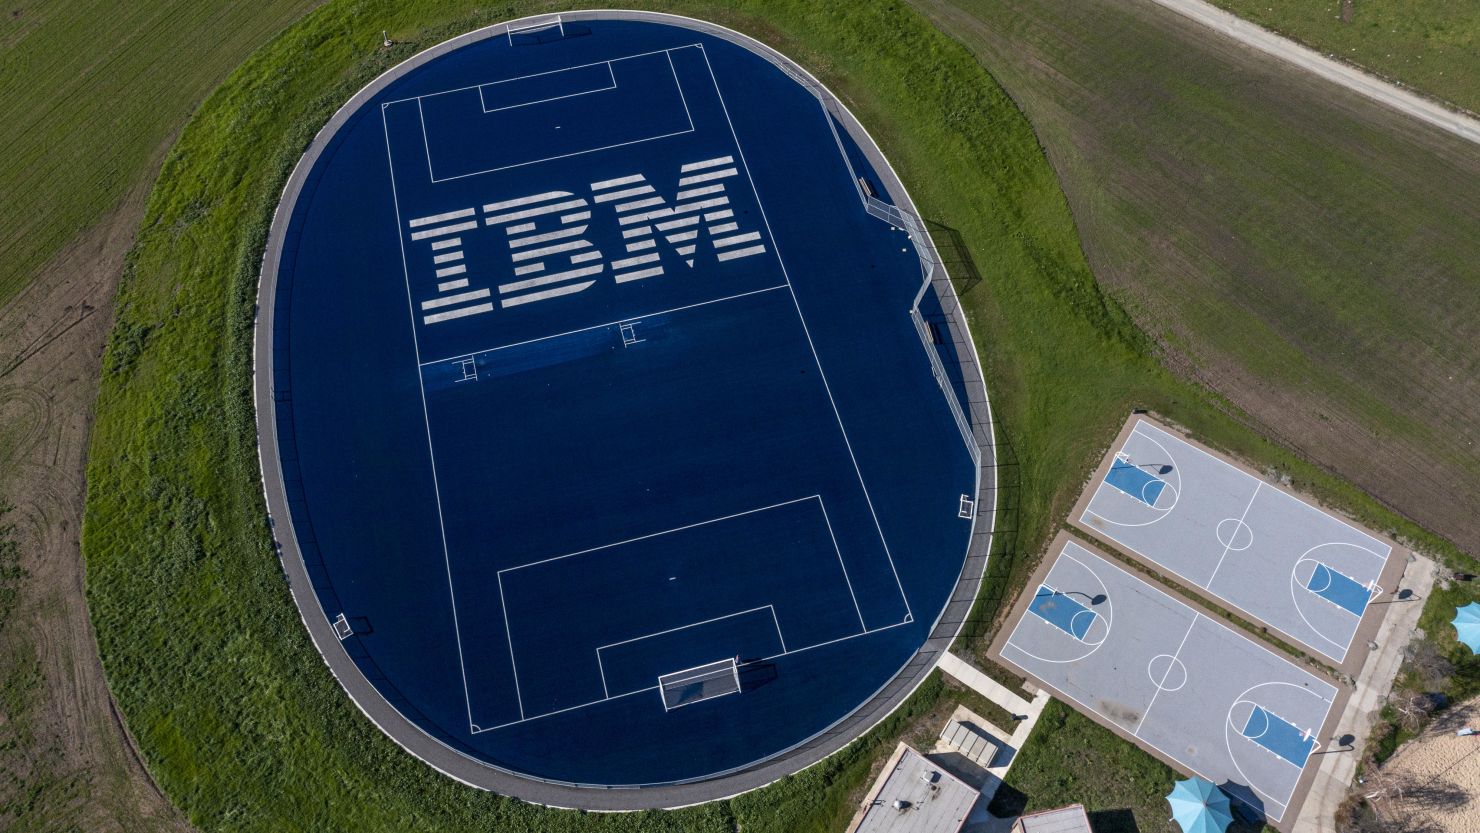 Athletics fields at the IBM Silicon Valley Laboratory in San Jose, California, U.S., on Thursday, Jan. 20, 2022. International Business Machines Corp. (IBM) is scheduled to release earnings figures on January 24. Photographer: David Paul Morris/Bloomberg via Getty Images